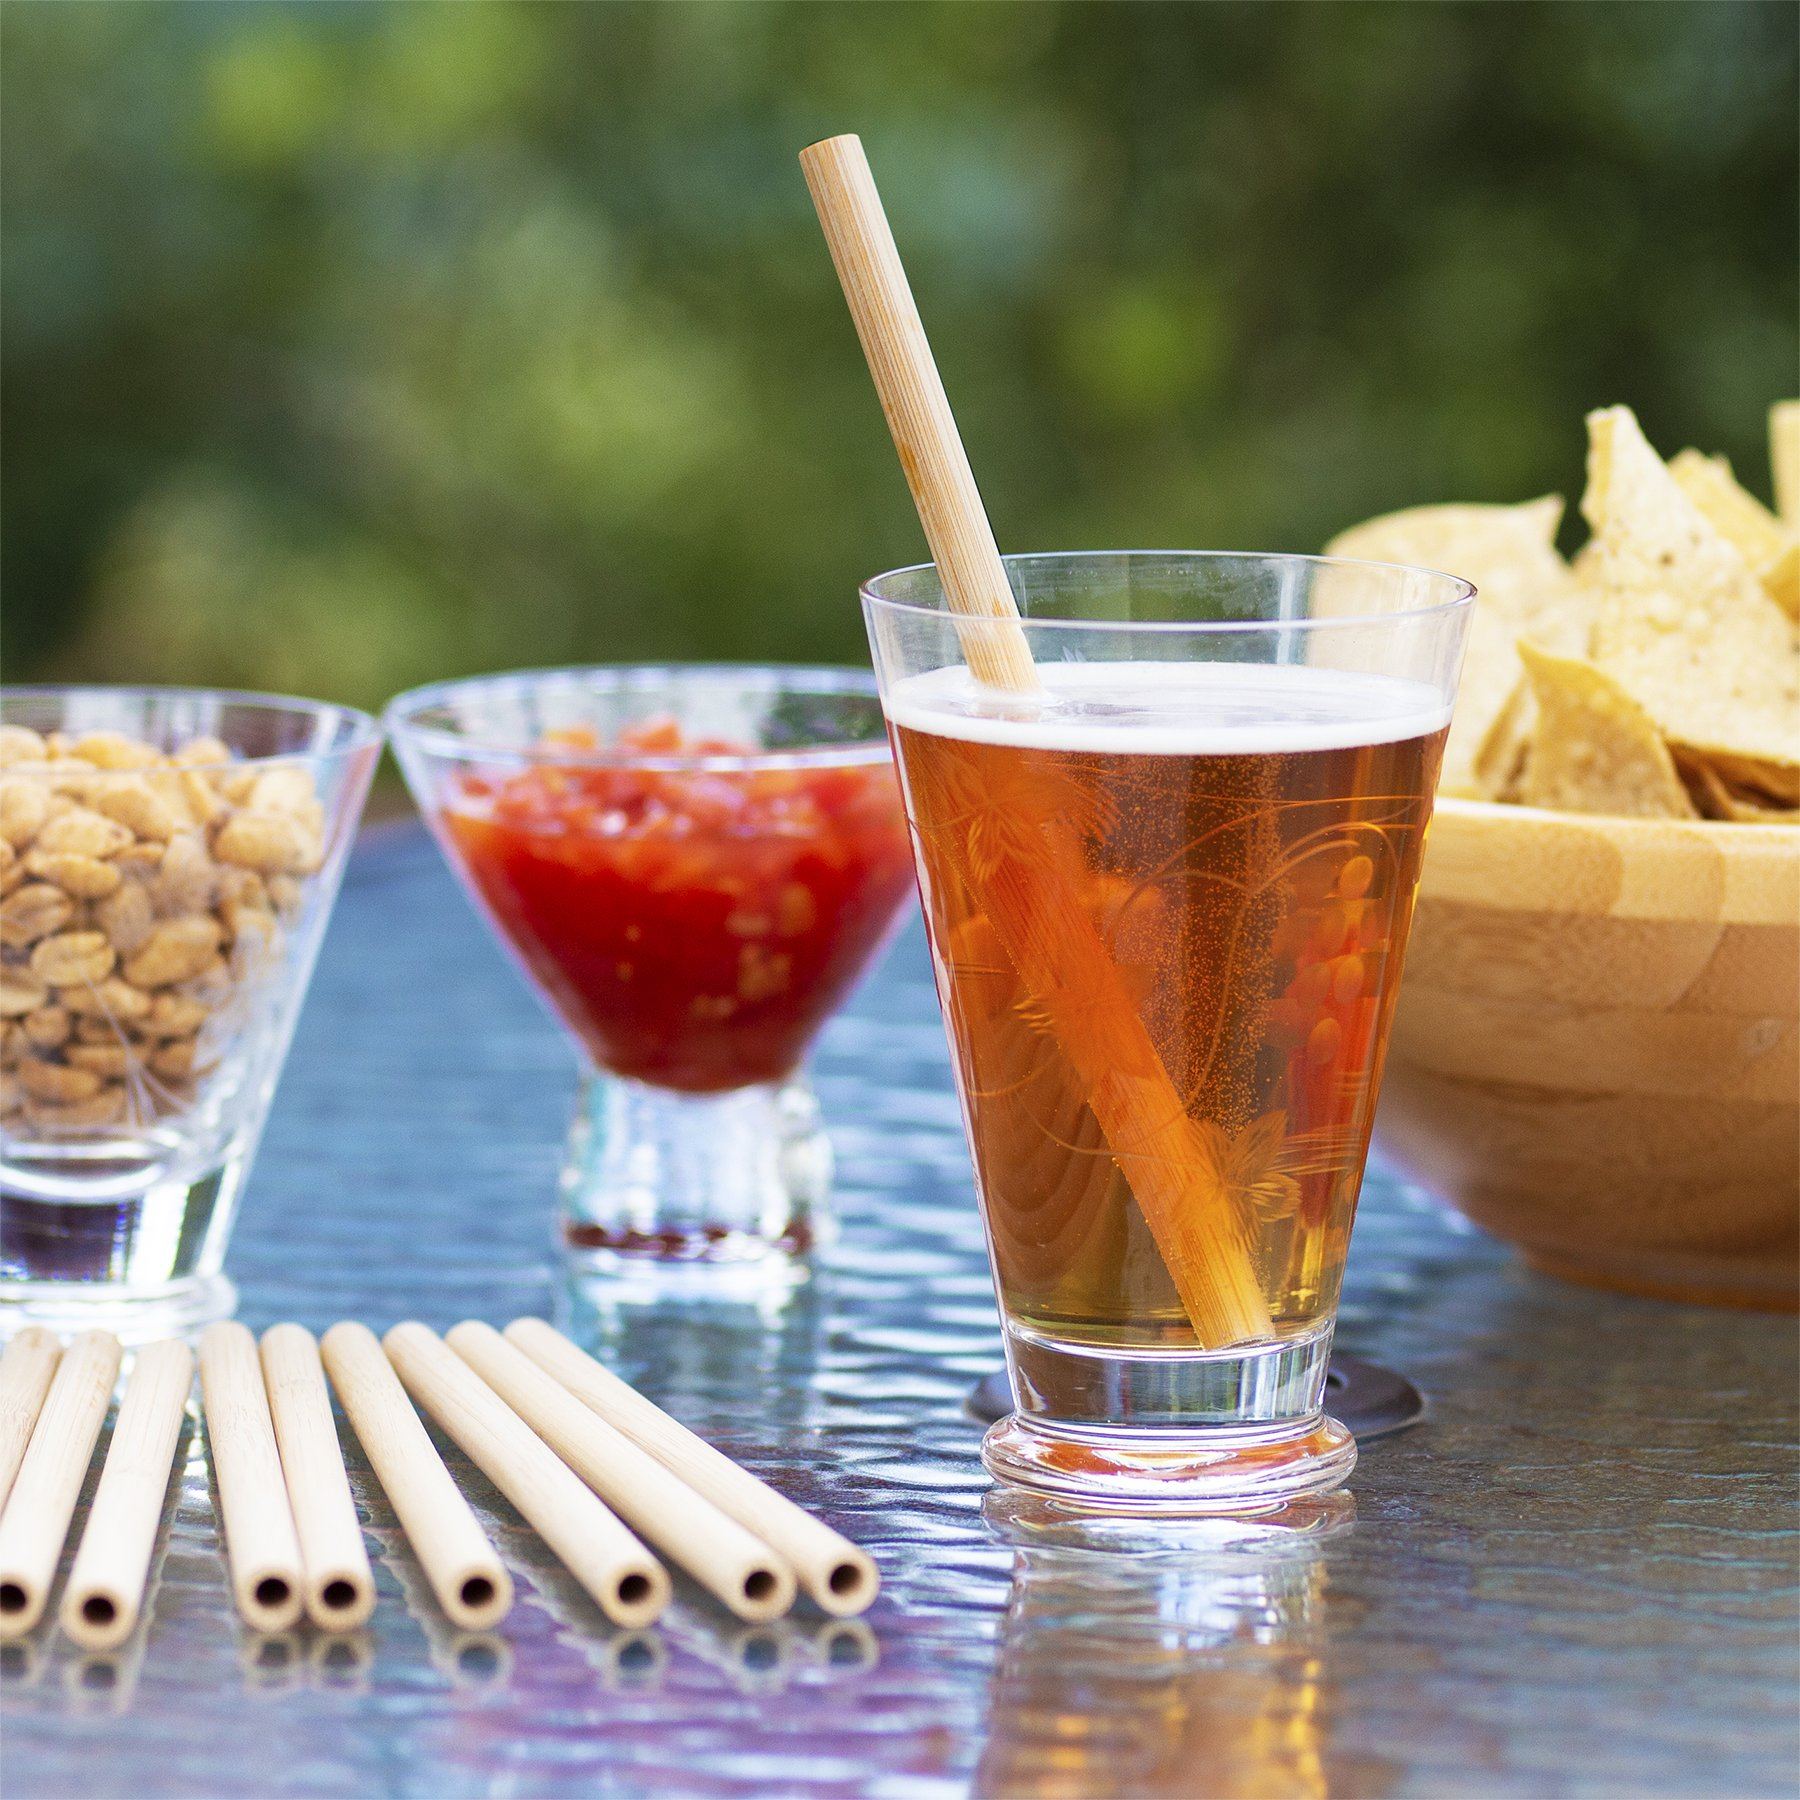 The Honolulu Straw 2-Pack Bamboo Straws with Silicone Tips